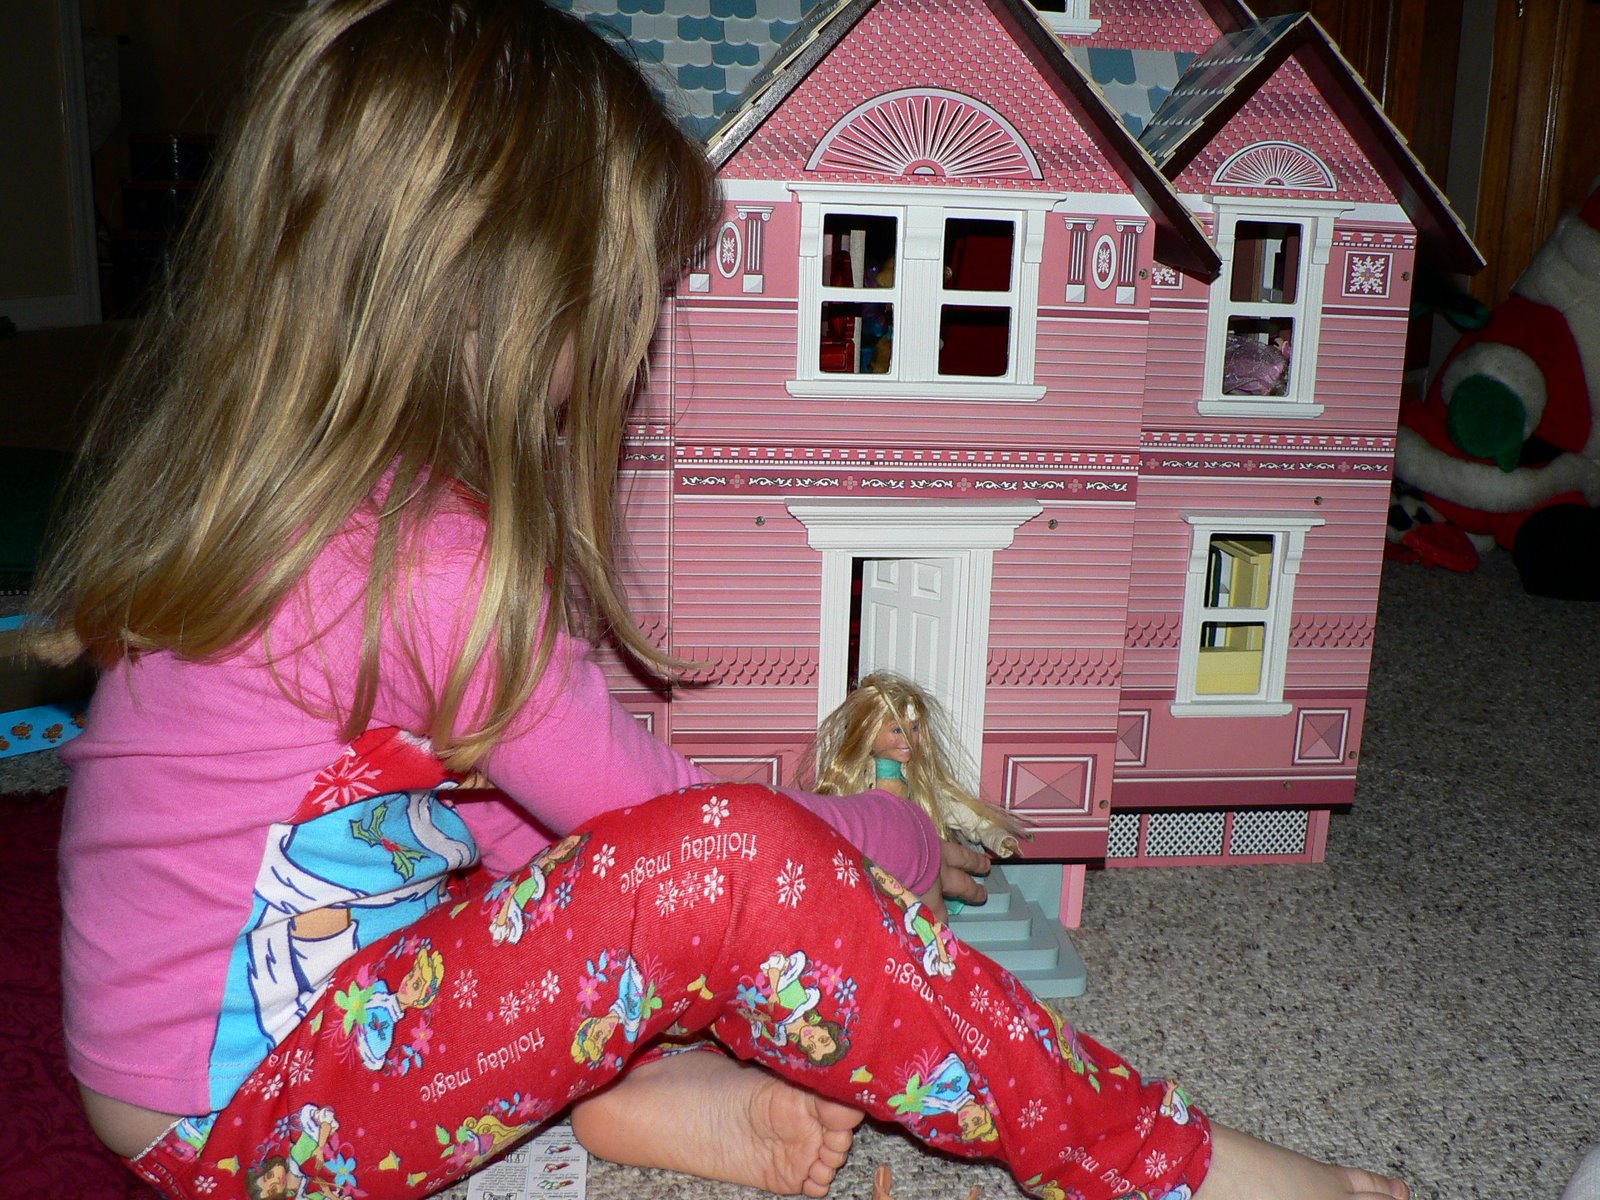 [bella+and+her+house.jpg]